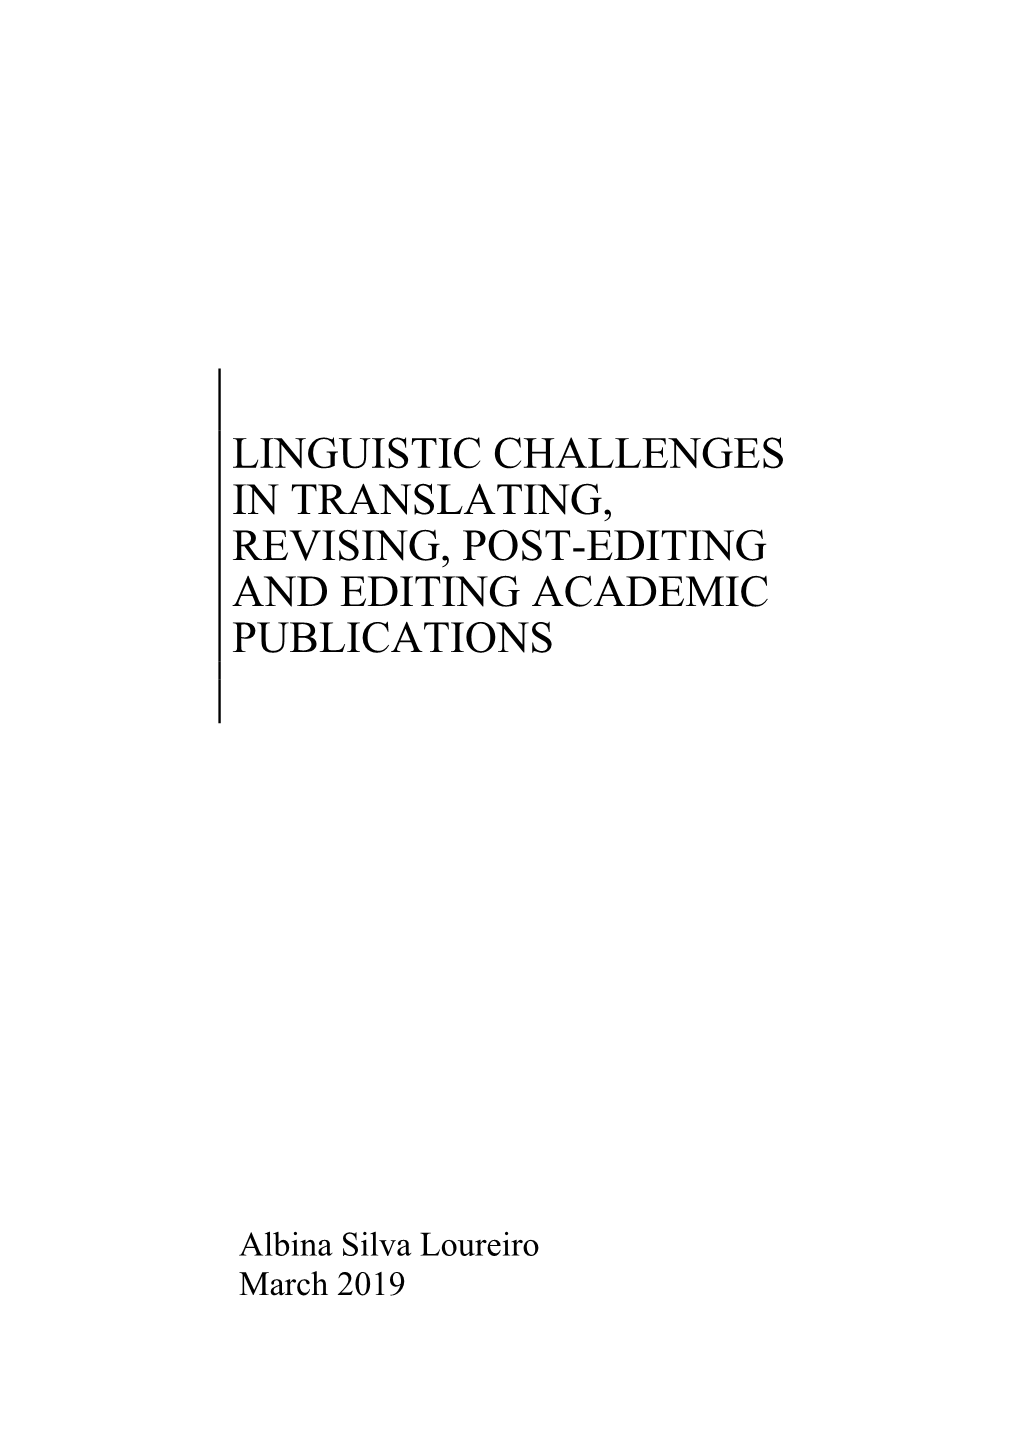 Linguistic Challenges in Translating, Revising, Post-Editing and Editing Academic Publications